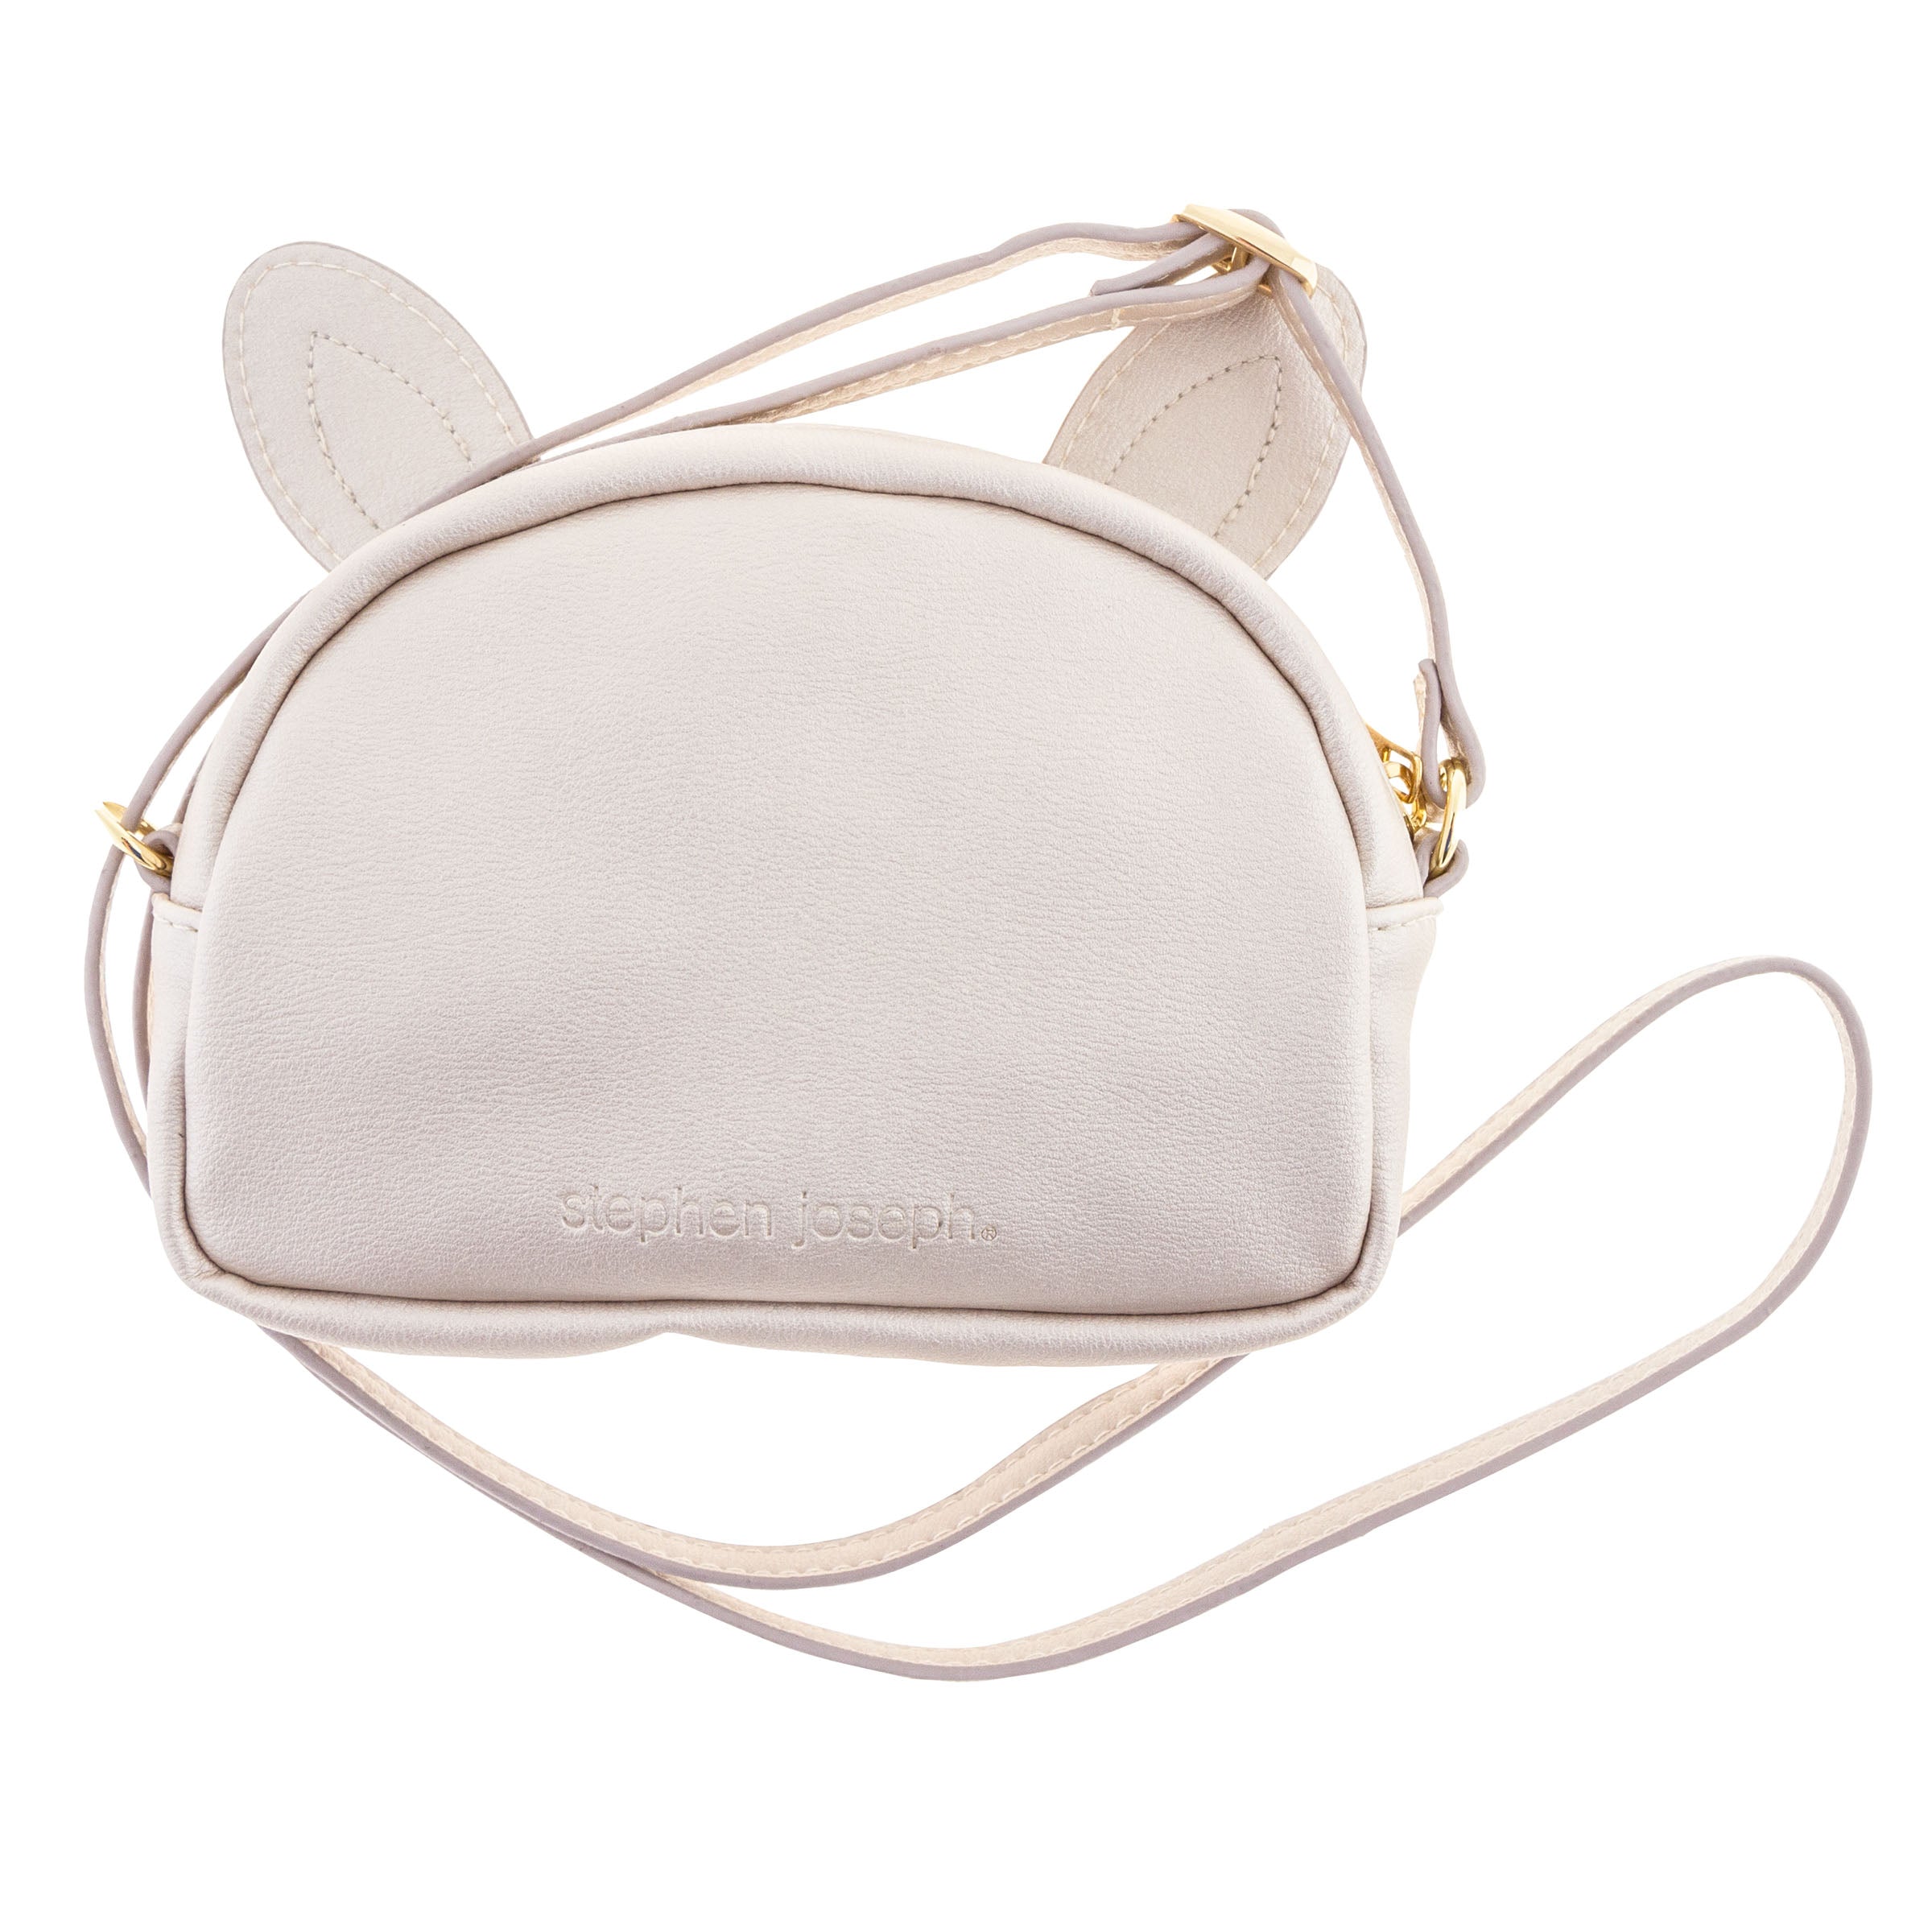 15 Stylish Handbags That Every Fashionista Must Have | Leather handbags  women, Leather bag women, Bags leather handbags